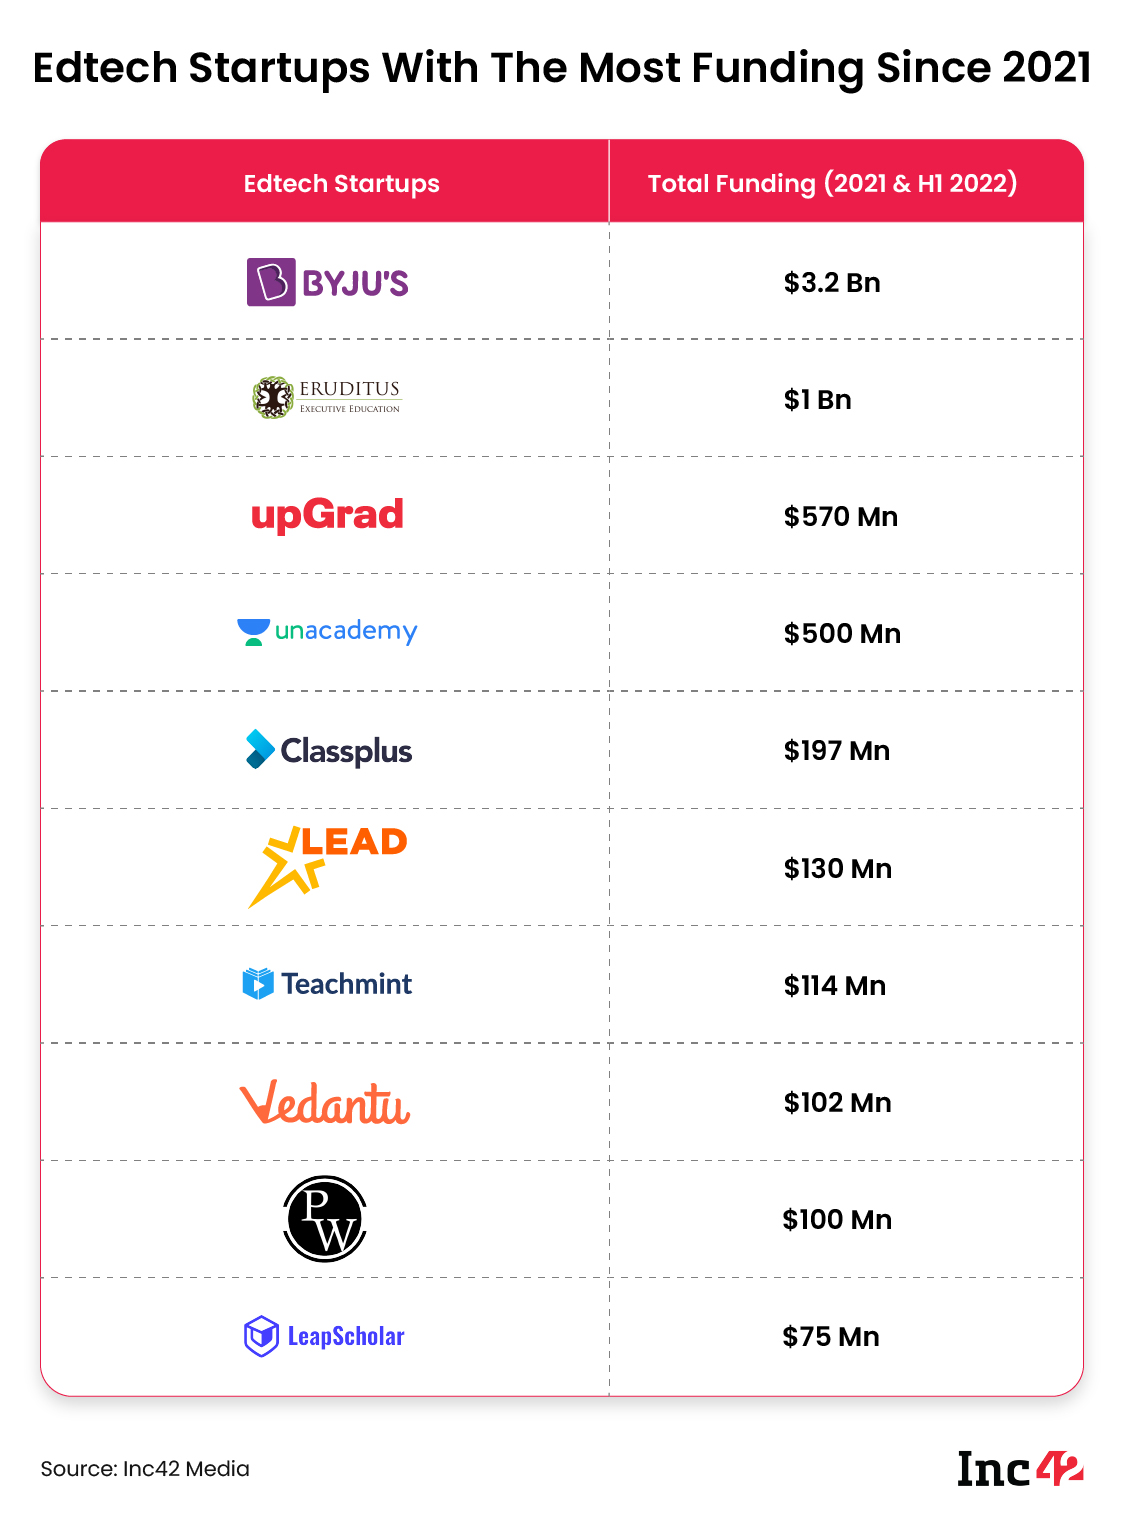 Edtech startups with the most funding since 2021